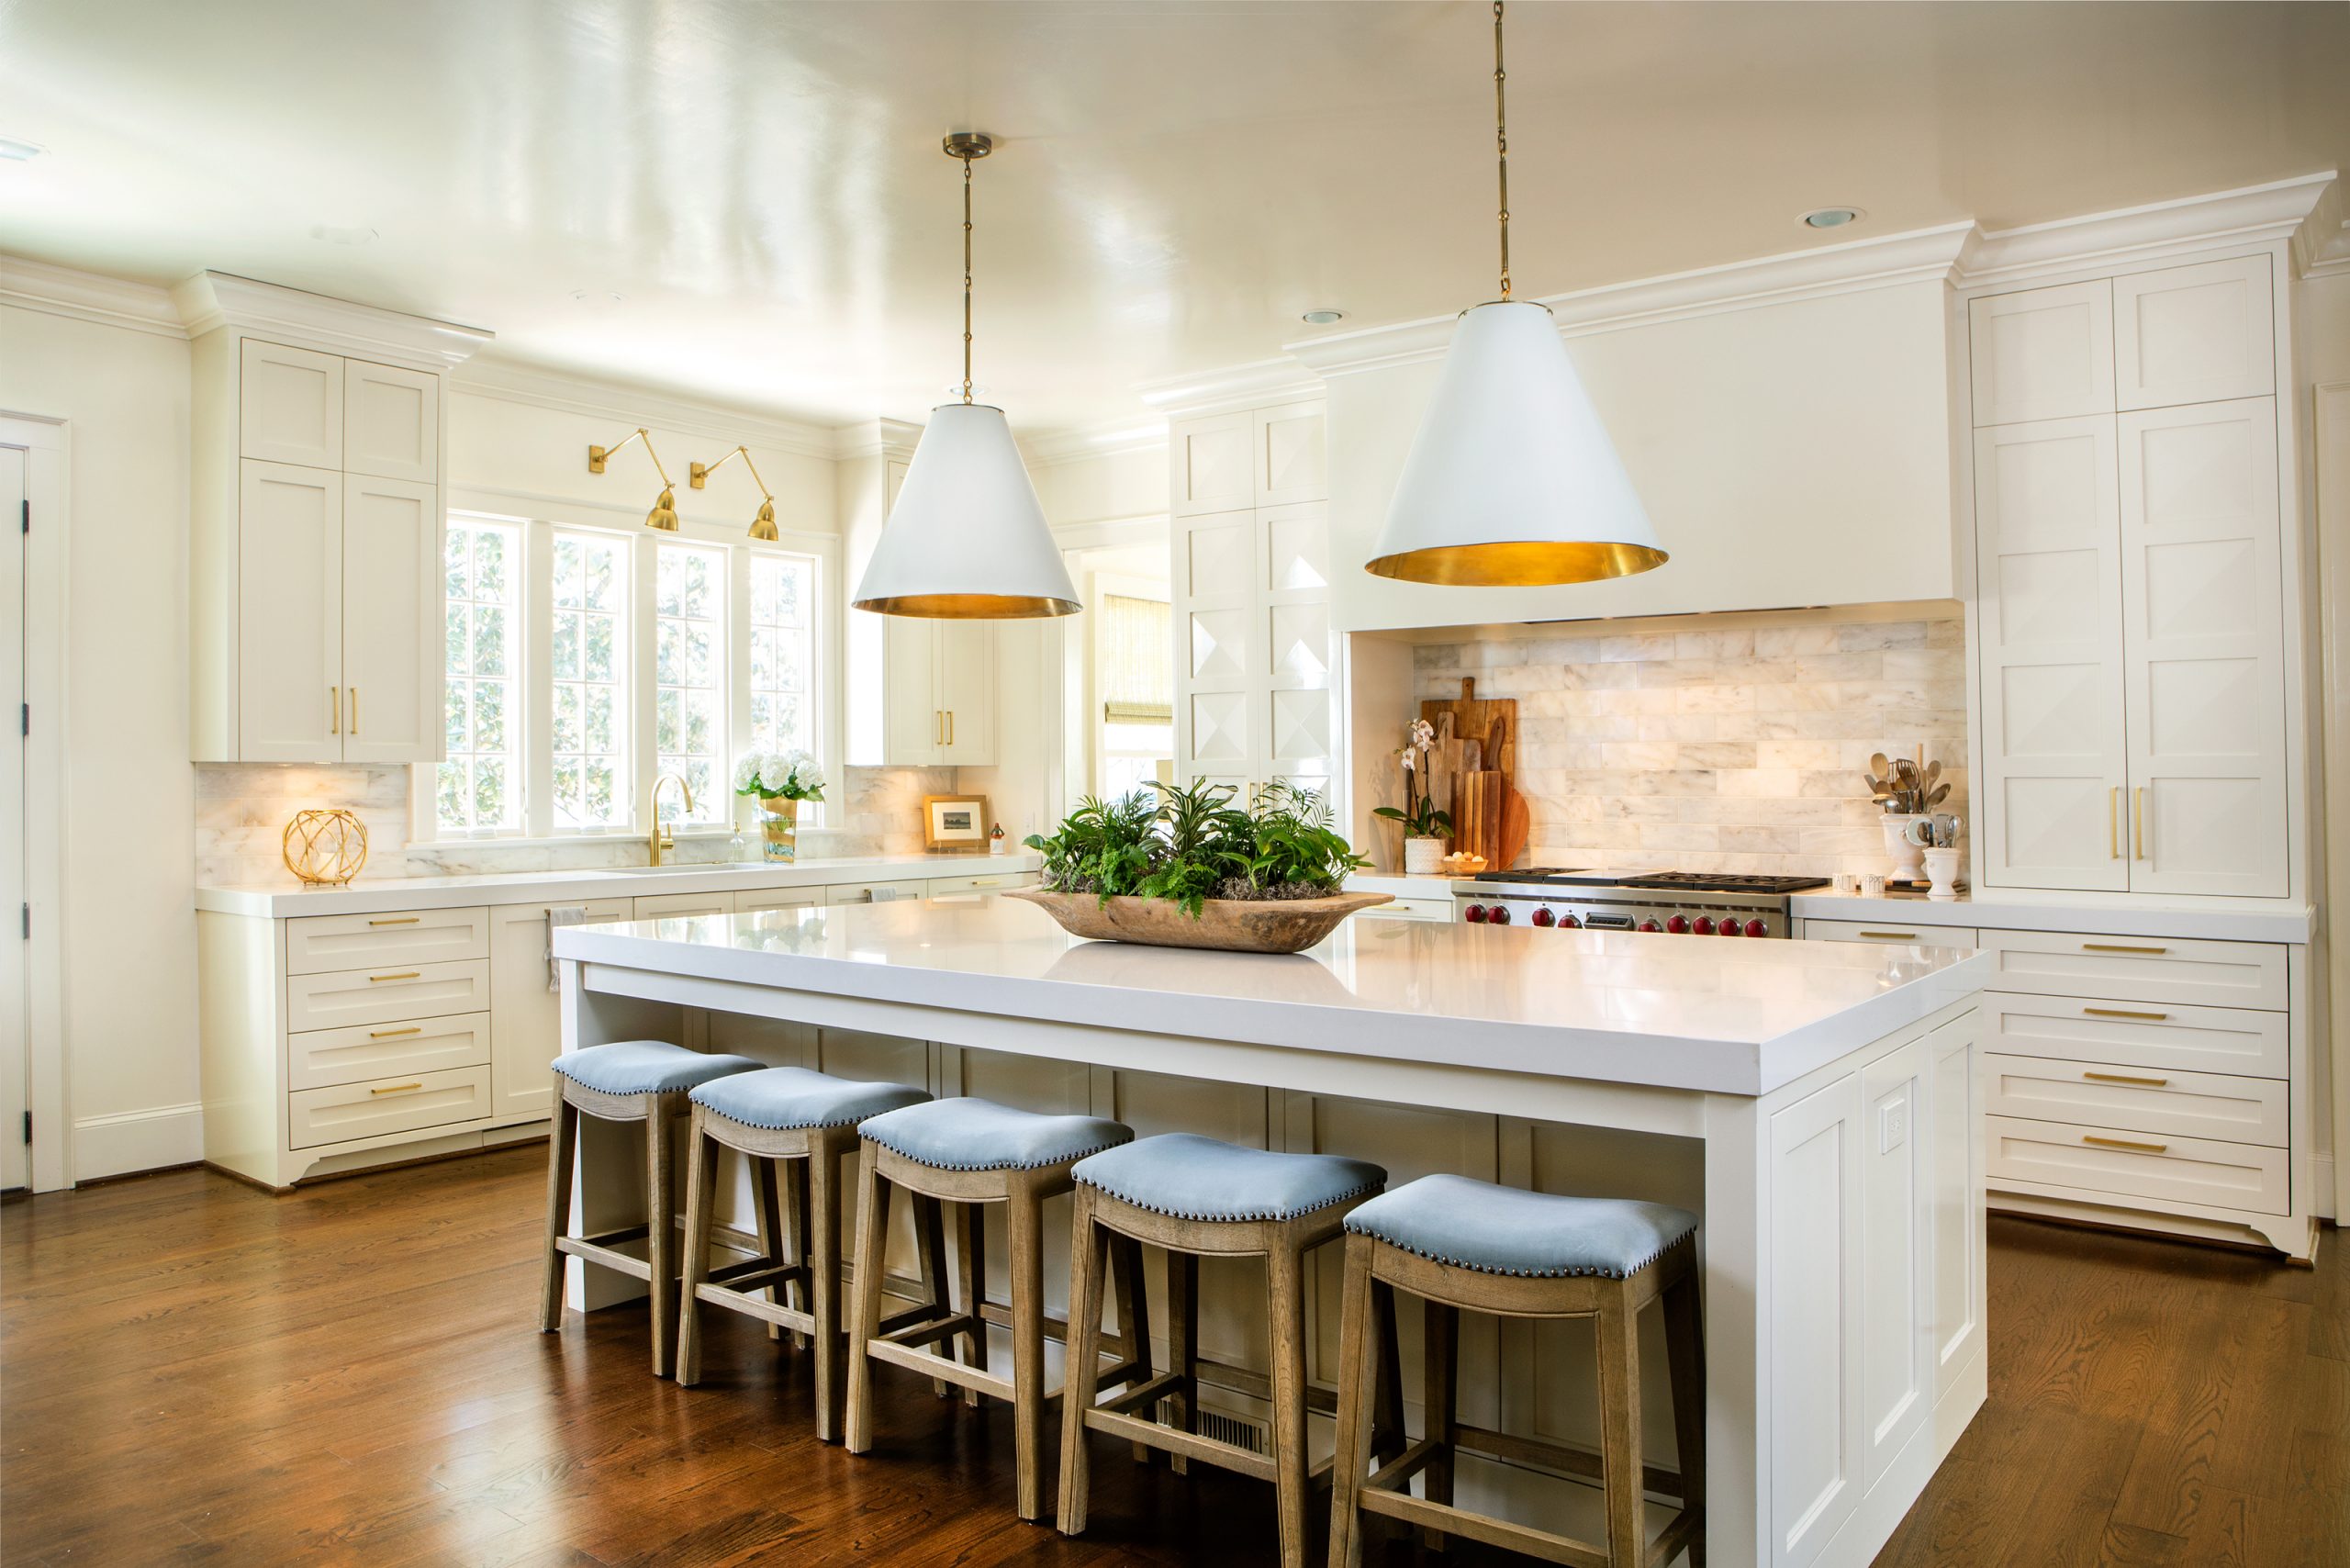 The kitchen is the heart of the home and the place where the Kays enjoy cooking and parties with friends and family. Gold toned hardware shines against white custom cabinetry, with a Calacatta marble backsplash and floor to ceiling symmetrical cabinets.